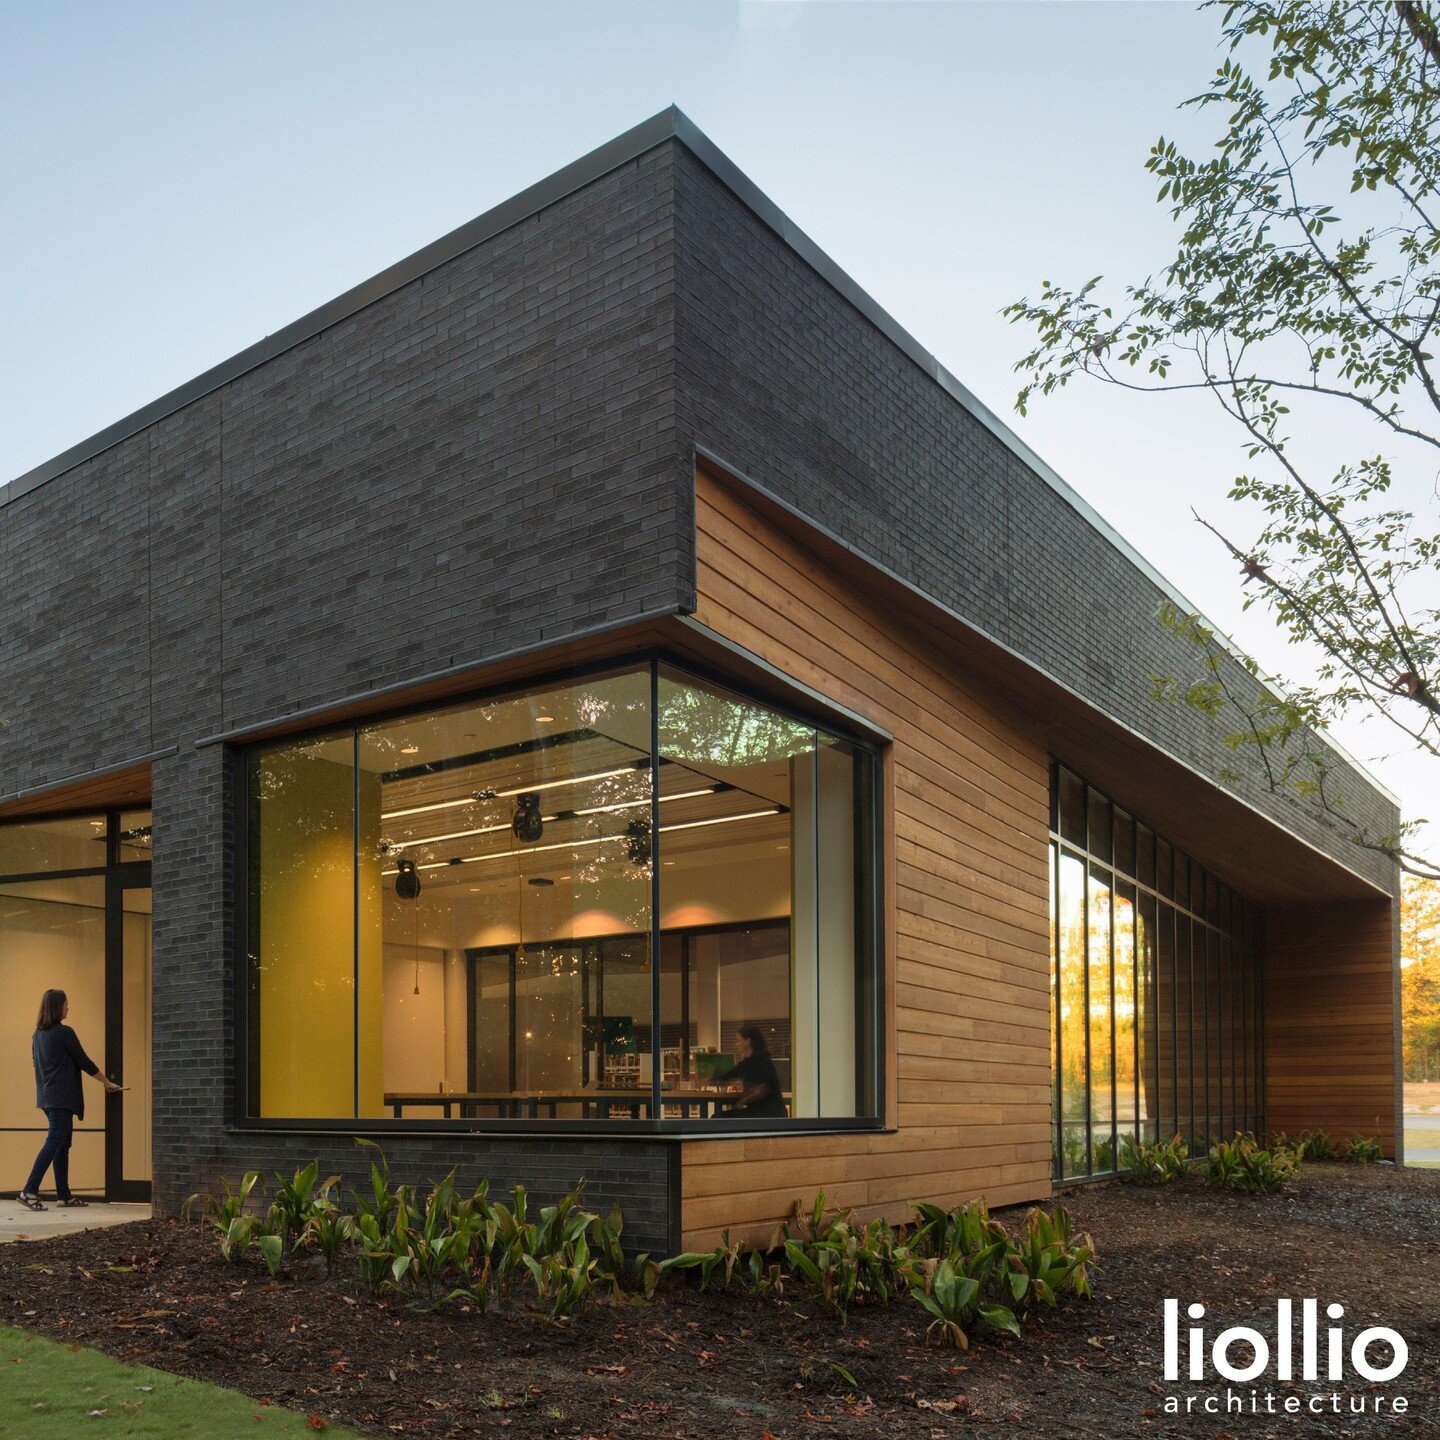 #TimecapsuleTuesday

A Merit Award in the Commercial Large category goes to Liollio Architecture for Richland Library Ballentine.

This suburban public library creates a wooded escape, to support an active local community of artists and craftspeople.